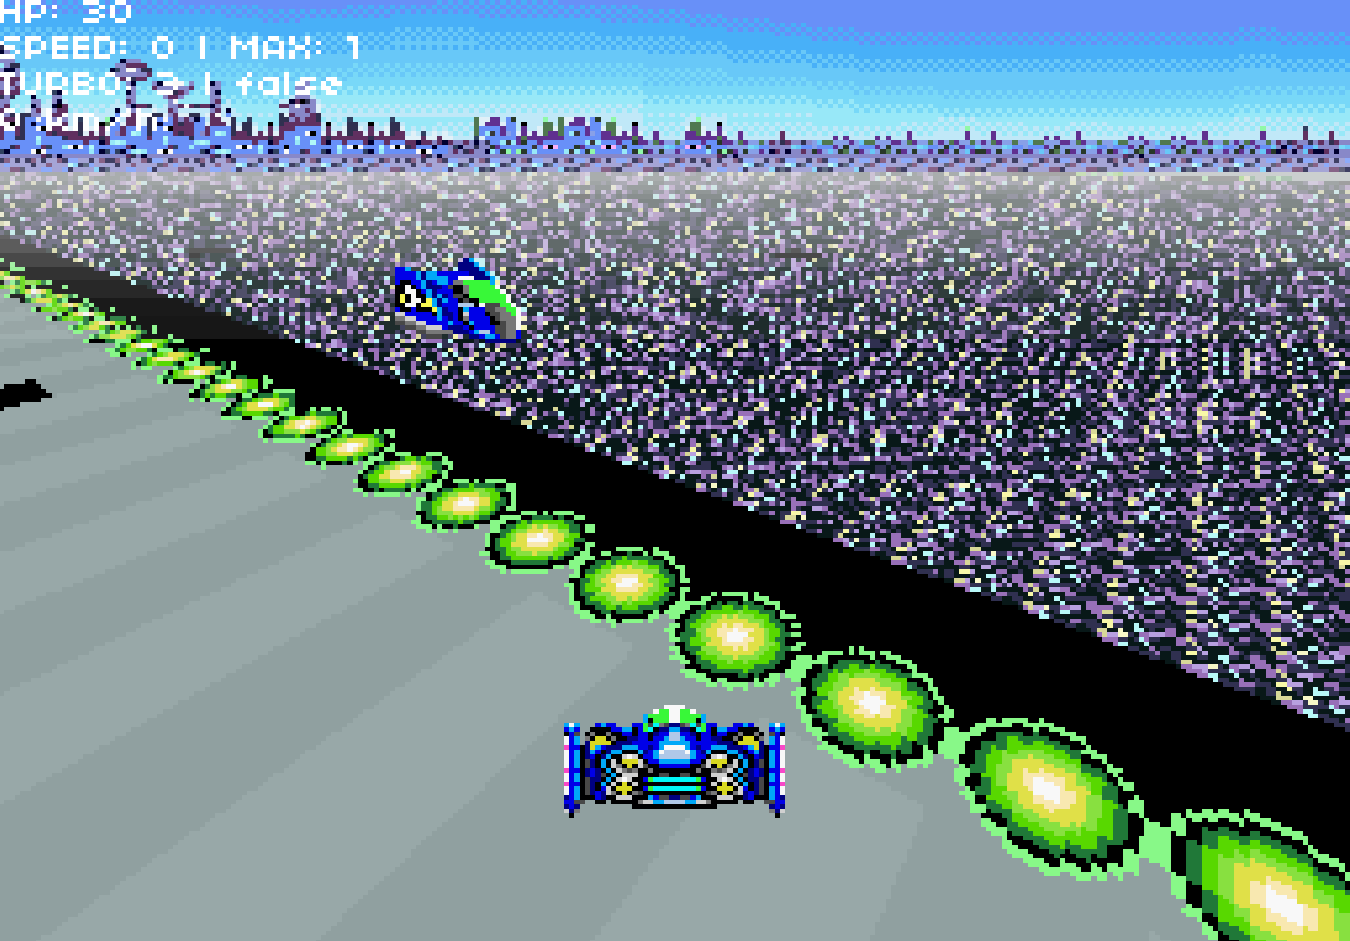 A game with graphics of a Super Nintendo game.